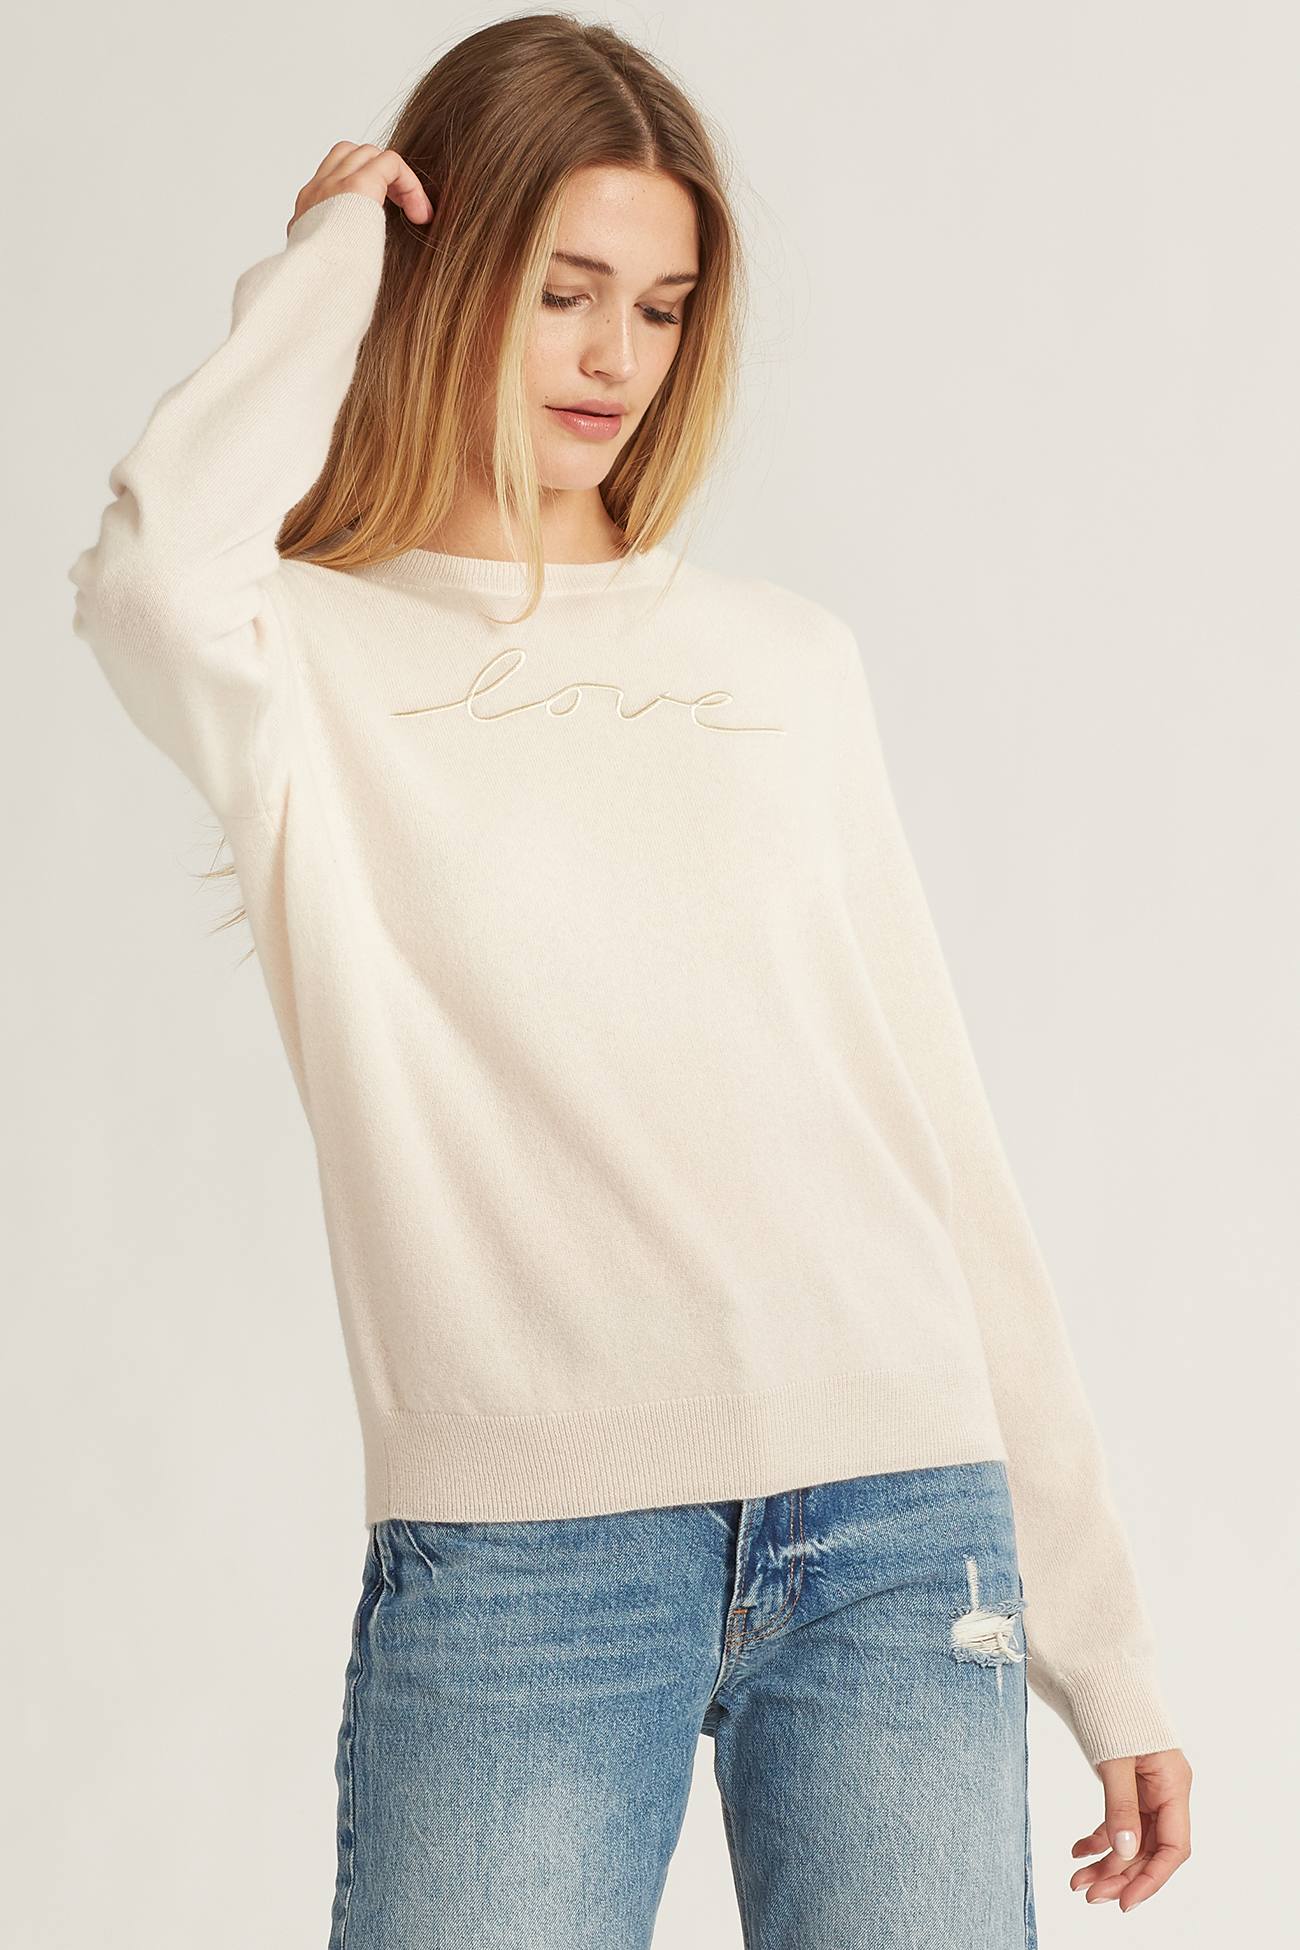 Naked Cashmere Love sweater